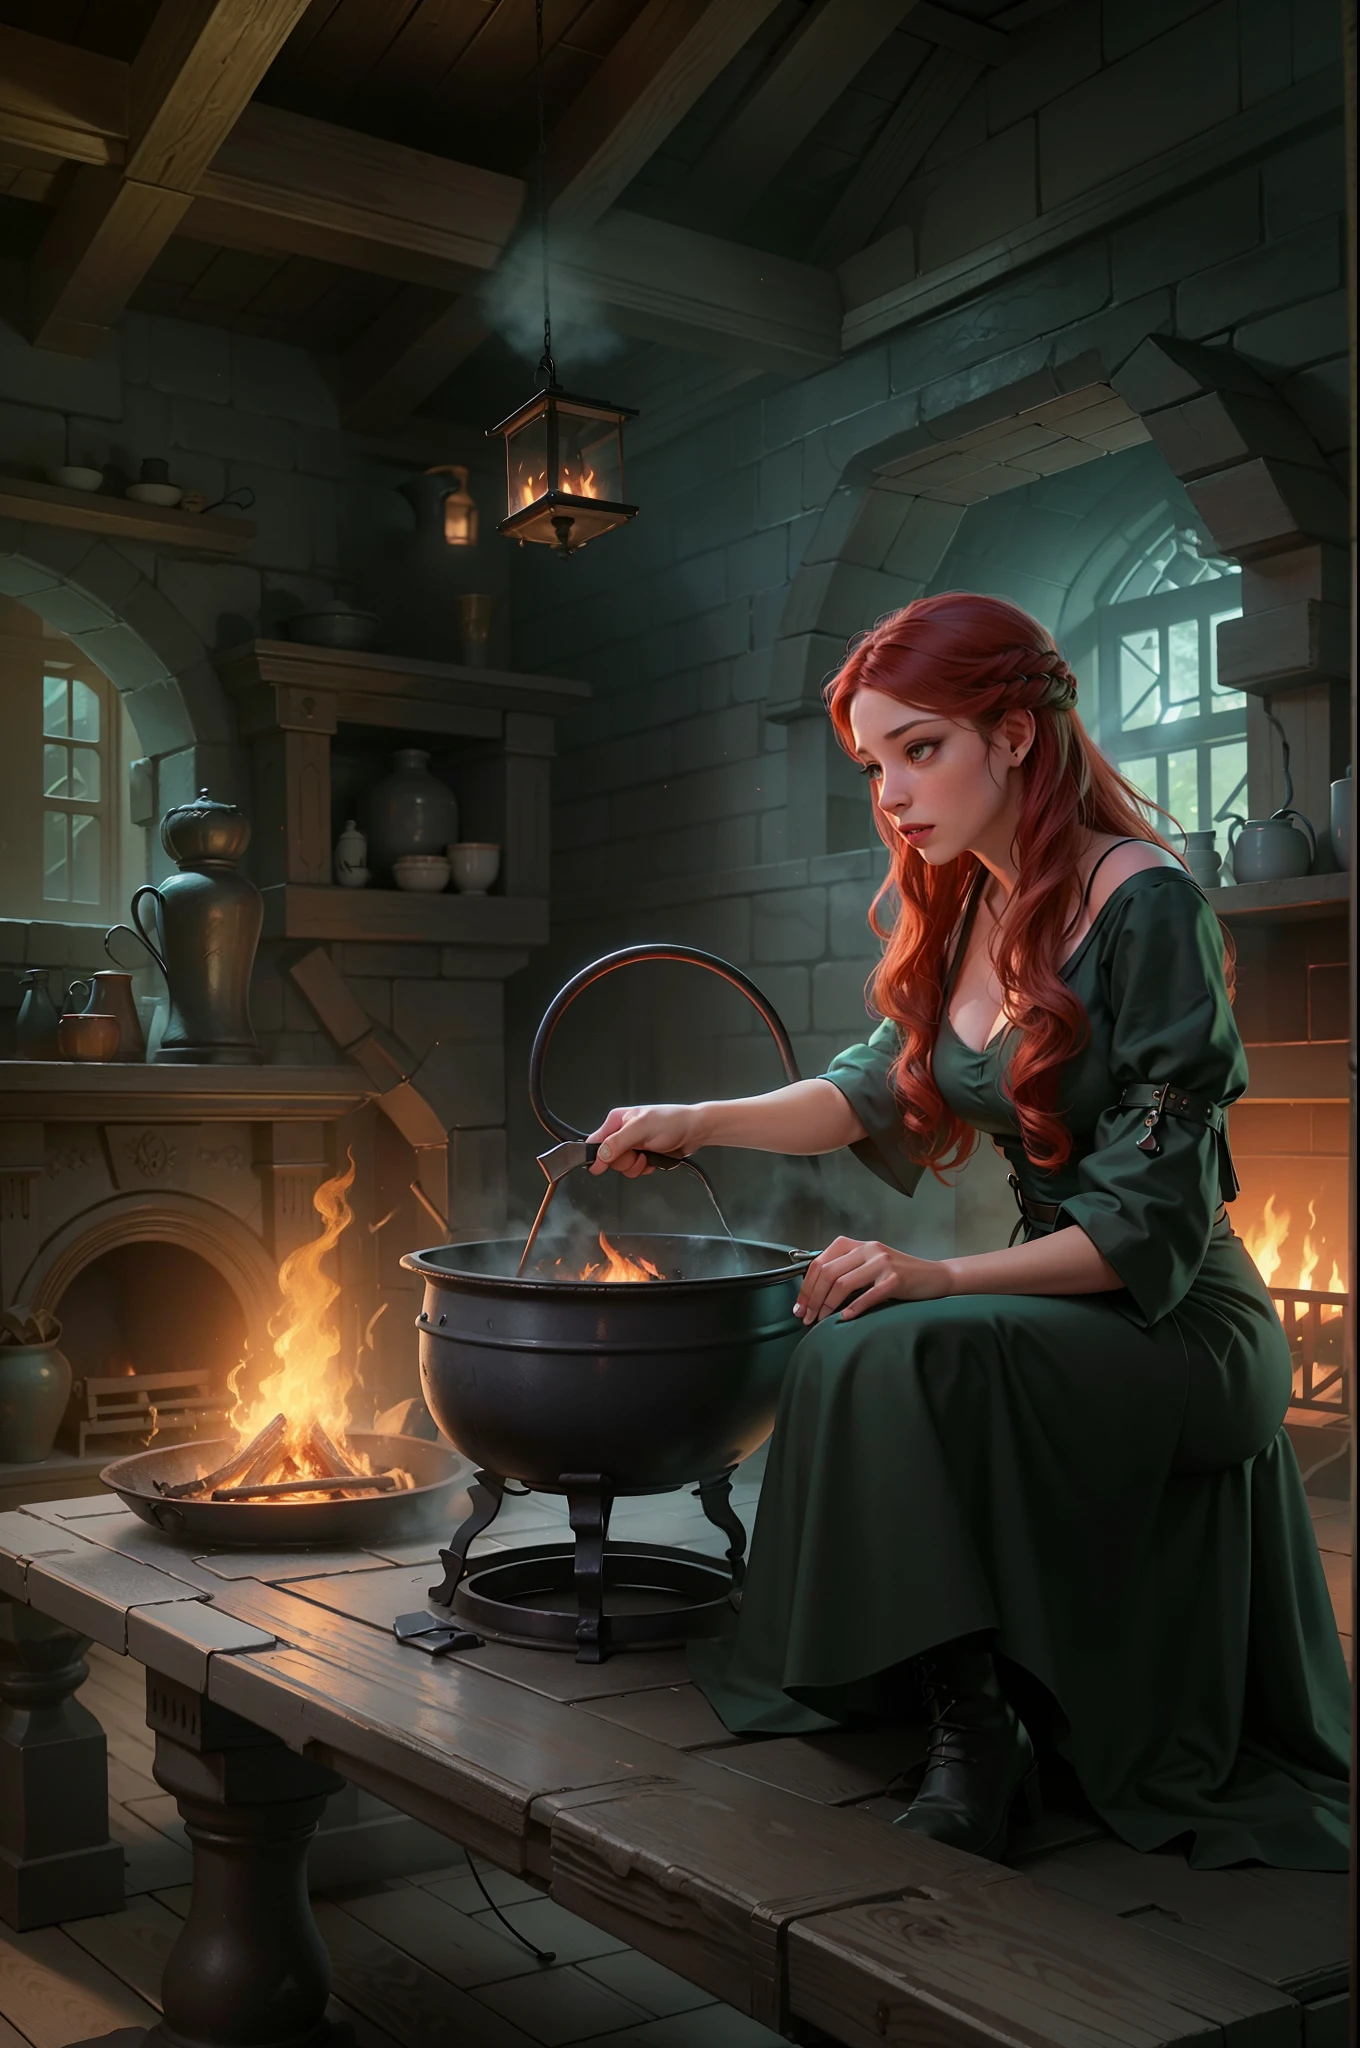 high details, best quality, 16k, RAW, [best detailed], masterpiece, best quality, (extremely detailed), full body (best details, Masterpiece, best quality), , ultra wide shot, photorealistic, fantasy art, RPG art, D&D art, a picture of a woman, witch brweing dark matter over big cauldron in the fire place, middle aged woman, exquisite beautiful woman (best details, Masterpiece, best quality), ultra detailed face (best details, Masterpiece, best quality), red hair, long hair, wavy hair, dynamic eye color, pale skin, green dress (best details, Masterpiece, best quality), wearing black boots, large boilng cauldron, black cauldron, green mists GlowingRunes_green, coming from cauldron, a stove, middles ages house background, dim fire light, High Detail, Ultra High Quality, High Resolution, 16K Resolution, Ultra HD Pictures, 3D rendering Ultra Realistic, Clear Details, Realistic Detail, Ultra High Definition Waiting to start